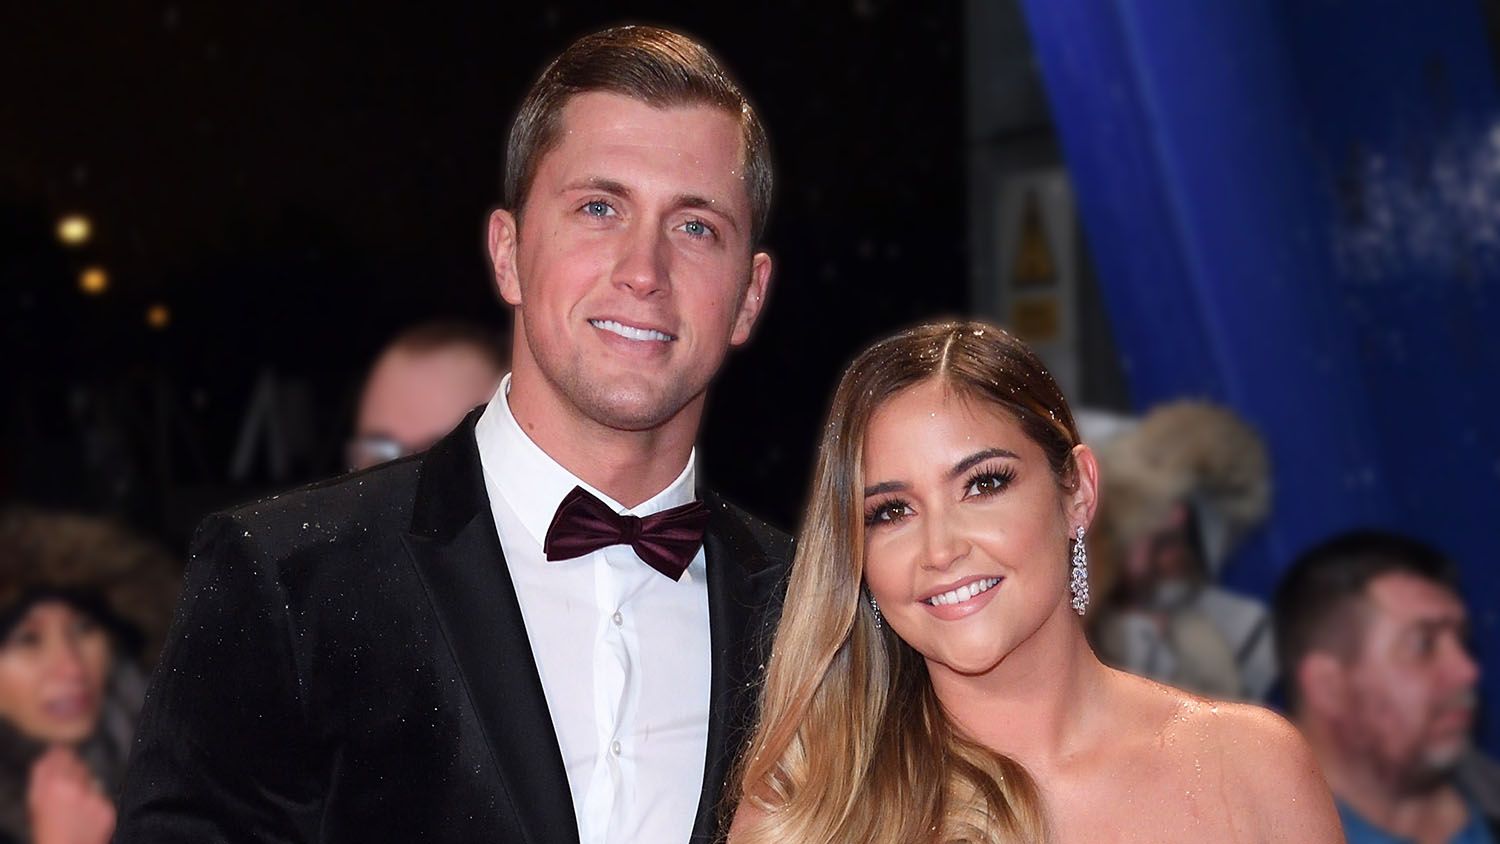 Jacqueline Jossa Hits Back At Claims She Removed Her Wedding Ring